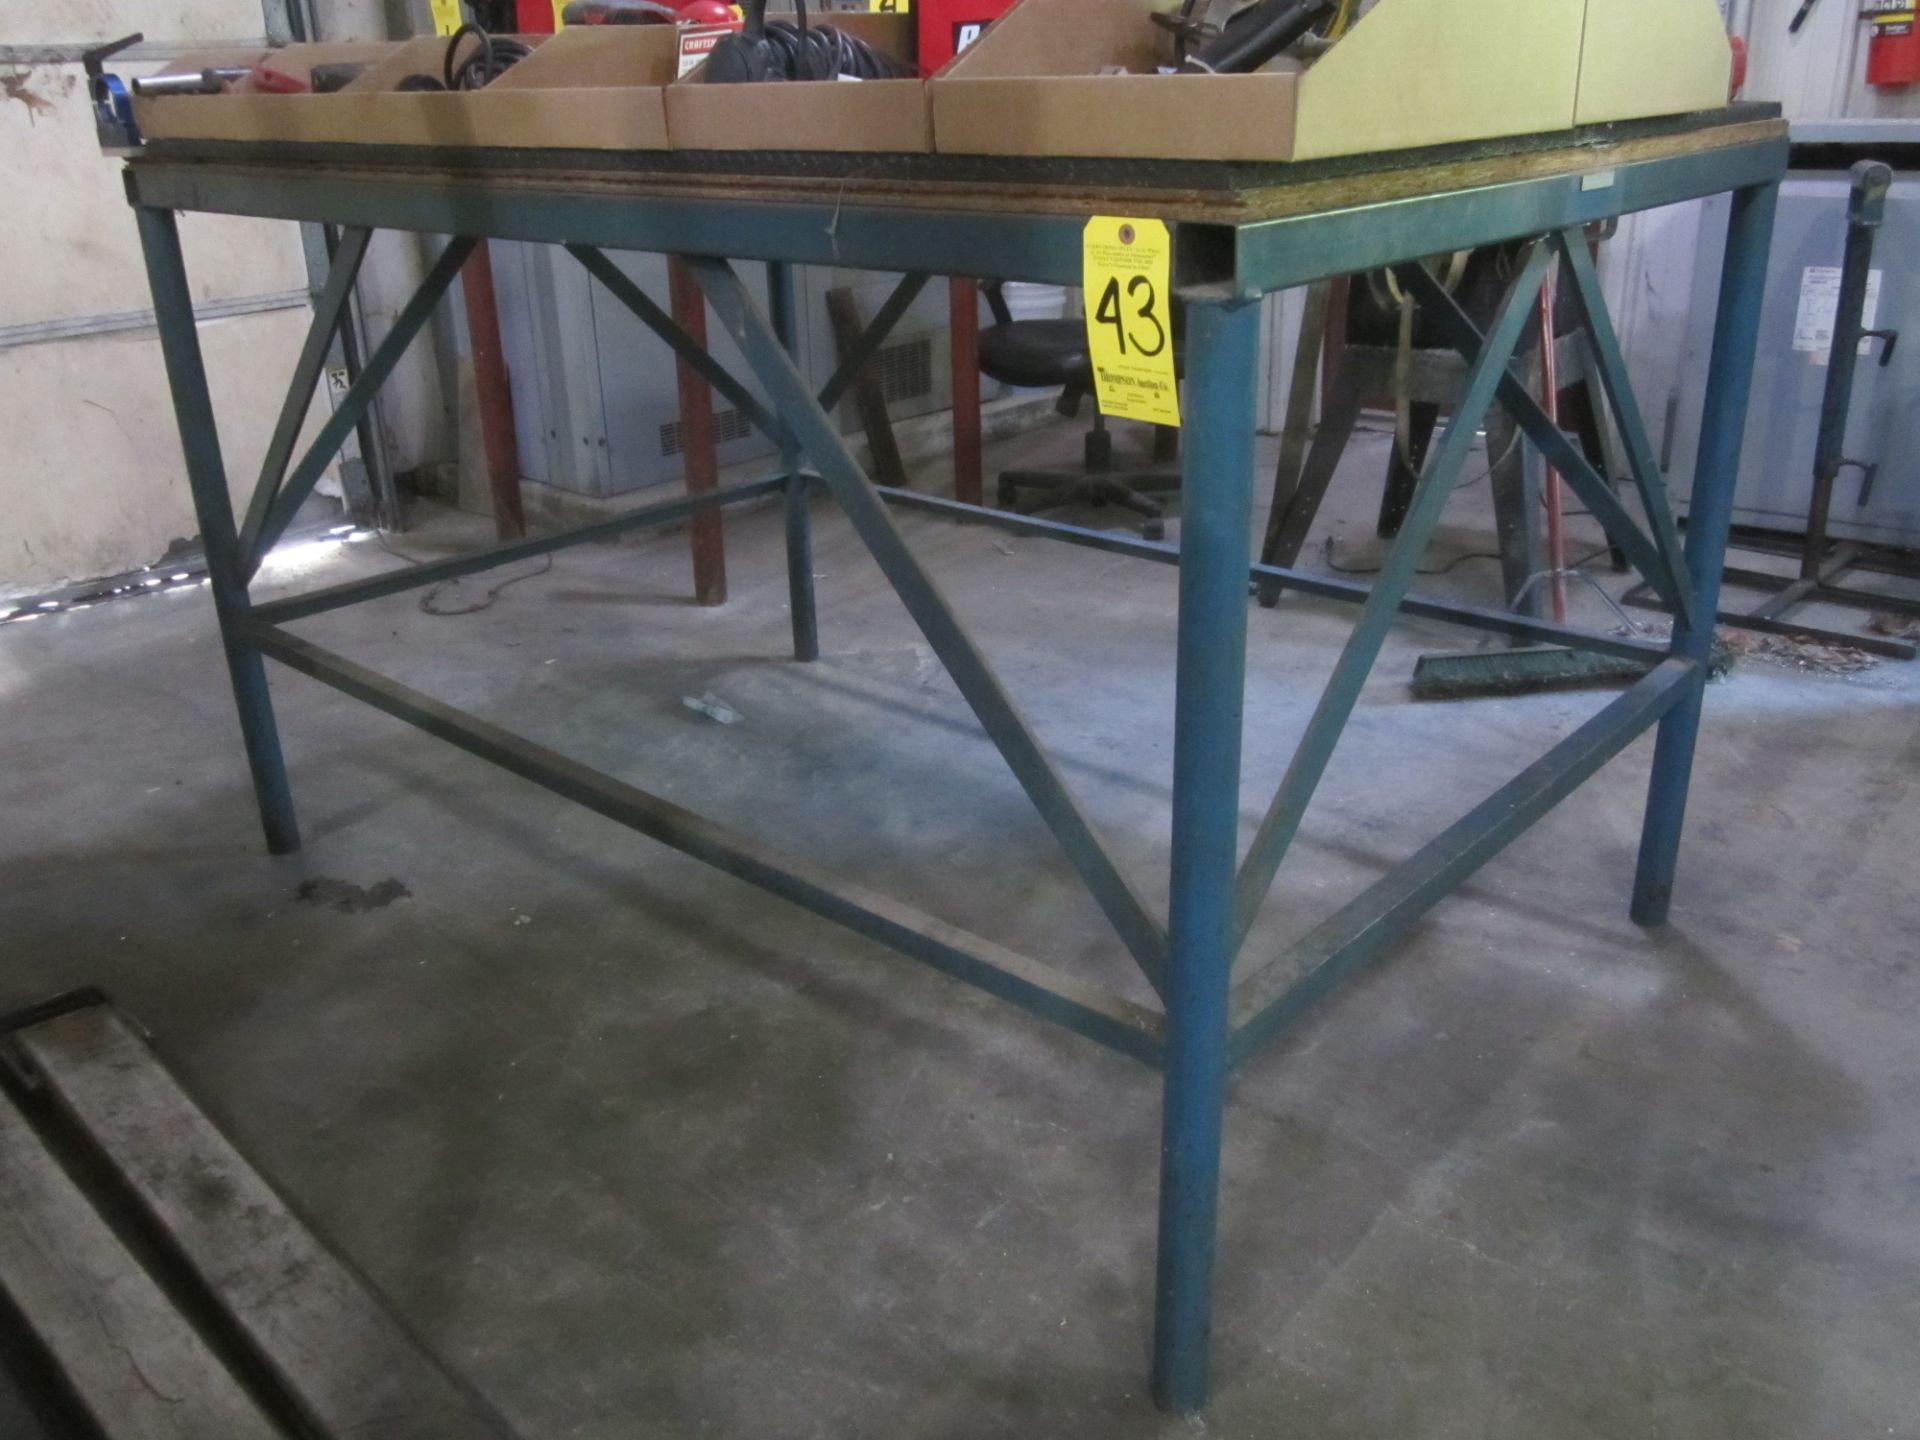 Shop Table, Steel Frame with Wood Top, 48" X 72" X 43" High